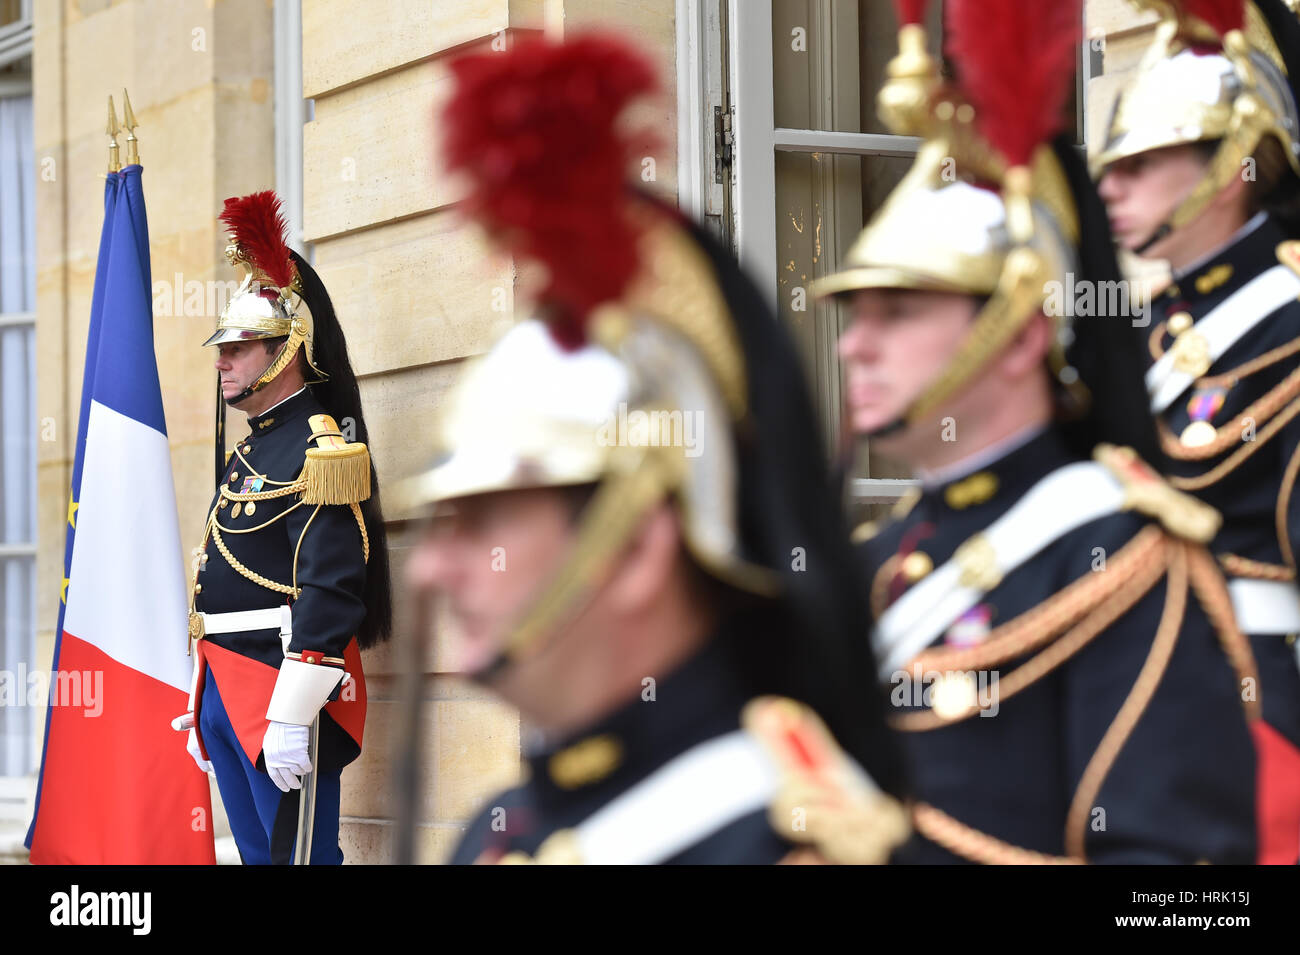 PARIS FRANCE - JUNE 10: Hotel Matignon Republican Guards of honor during a welcome ceremony on JUNE 10 2016 in Paris. Matignon is the official residen Stock Photo